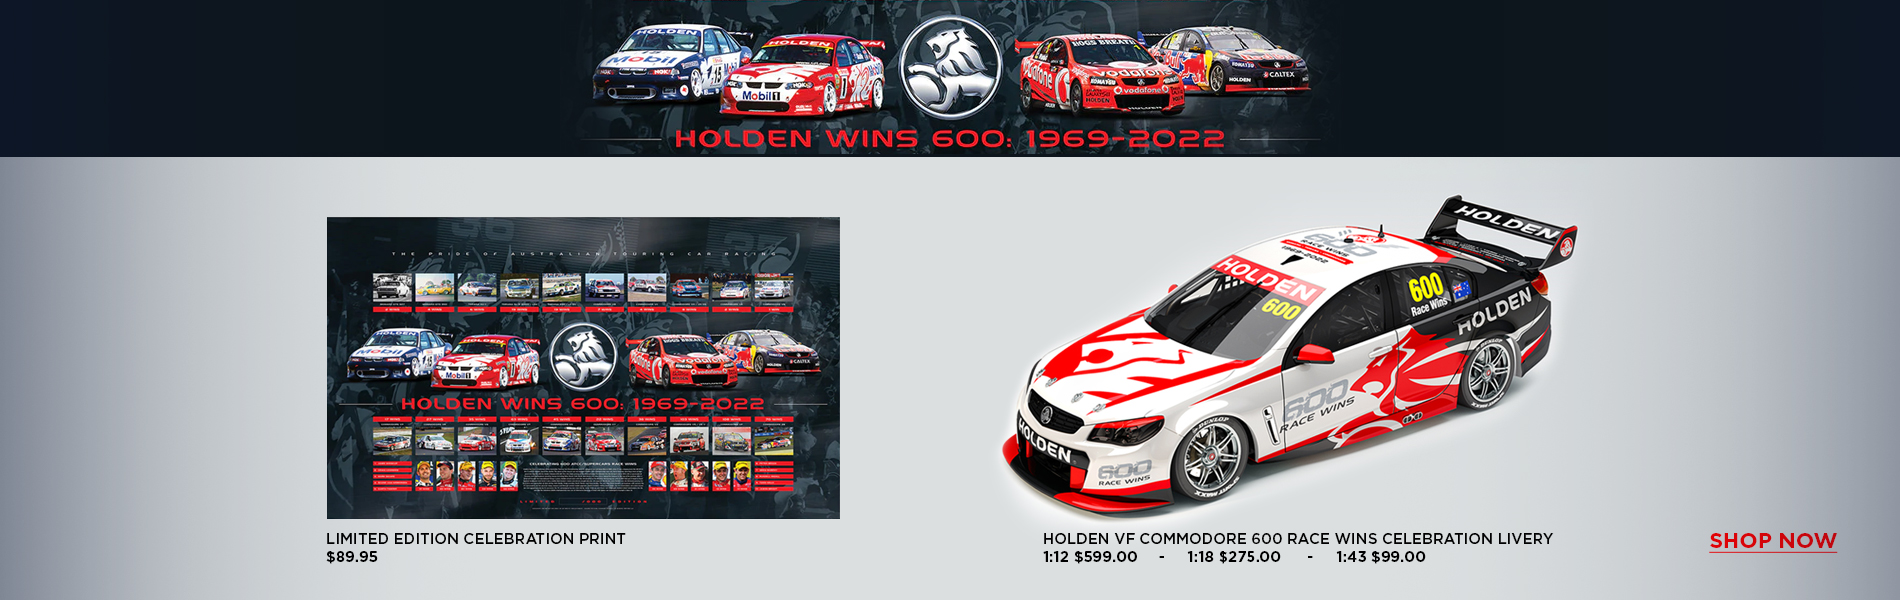 600-wins-holden-SS-homepage